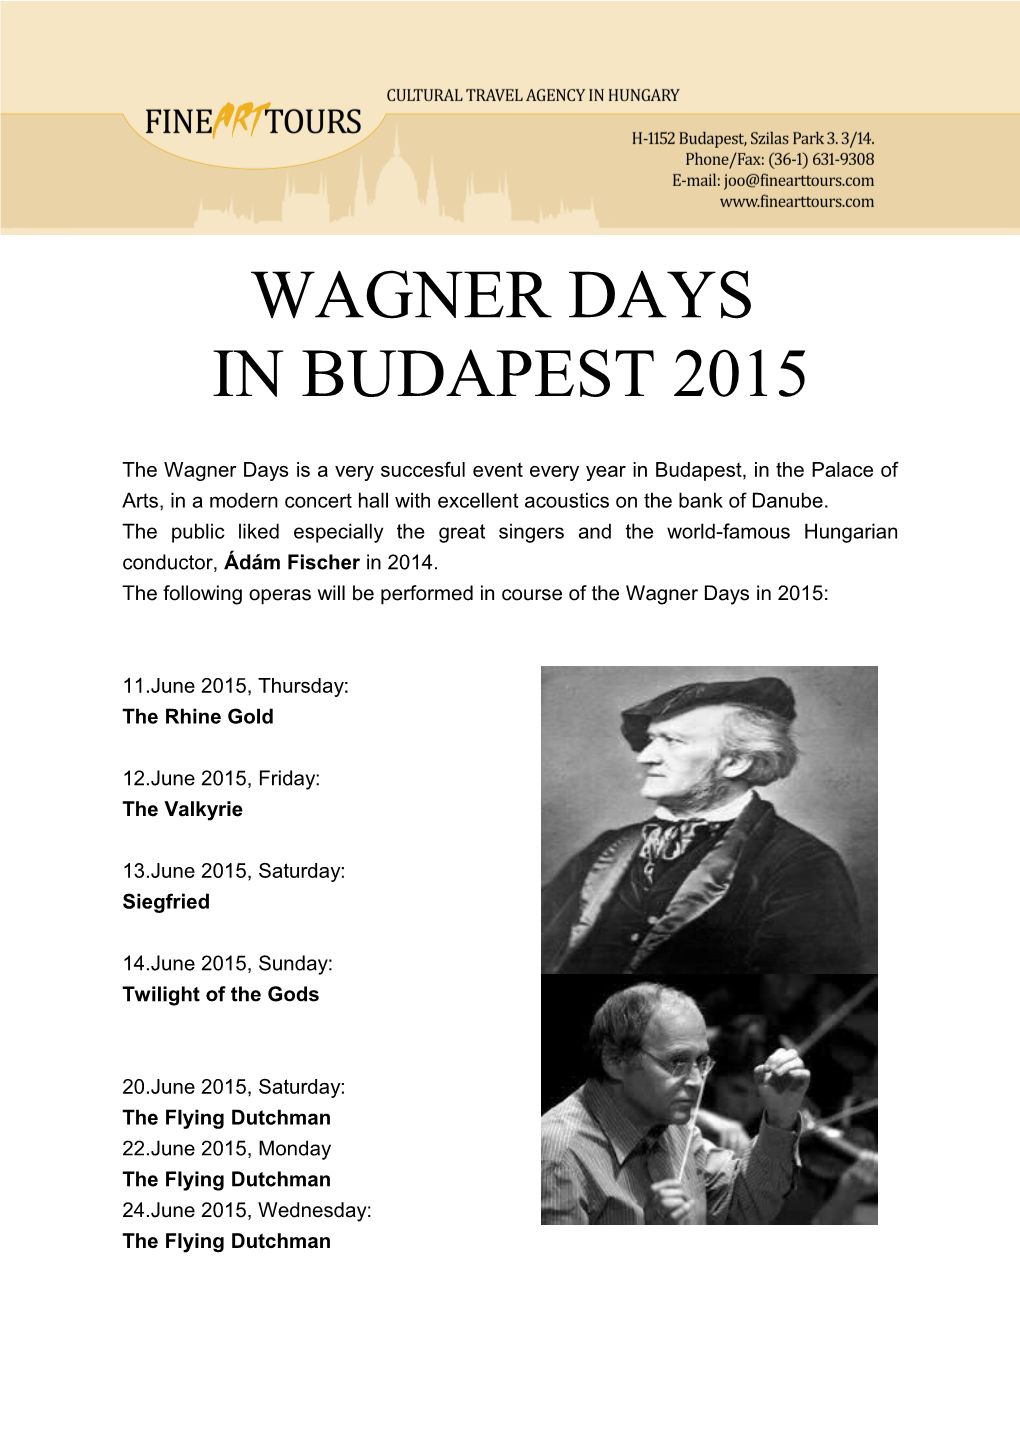 The Following Operas Will Be Performed in Course of the Wagner Days in 2015